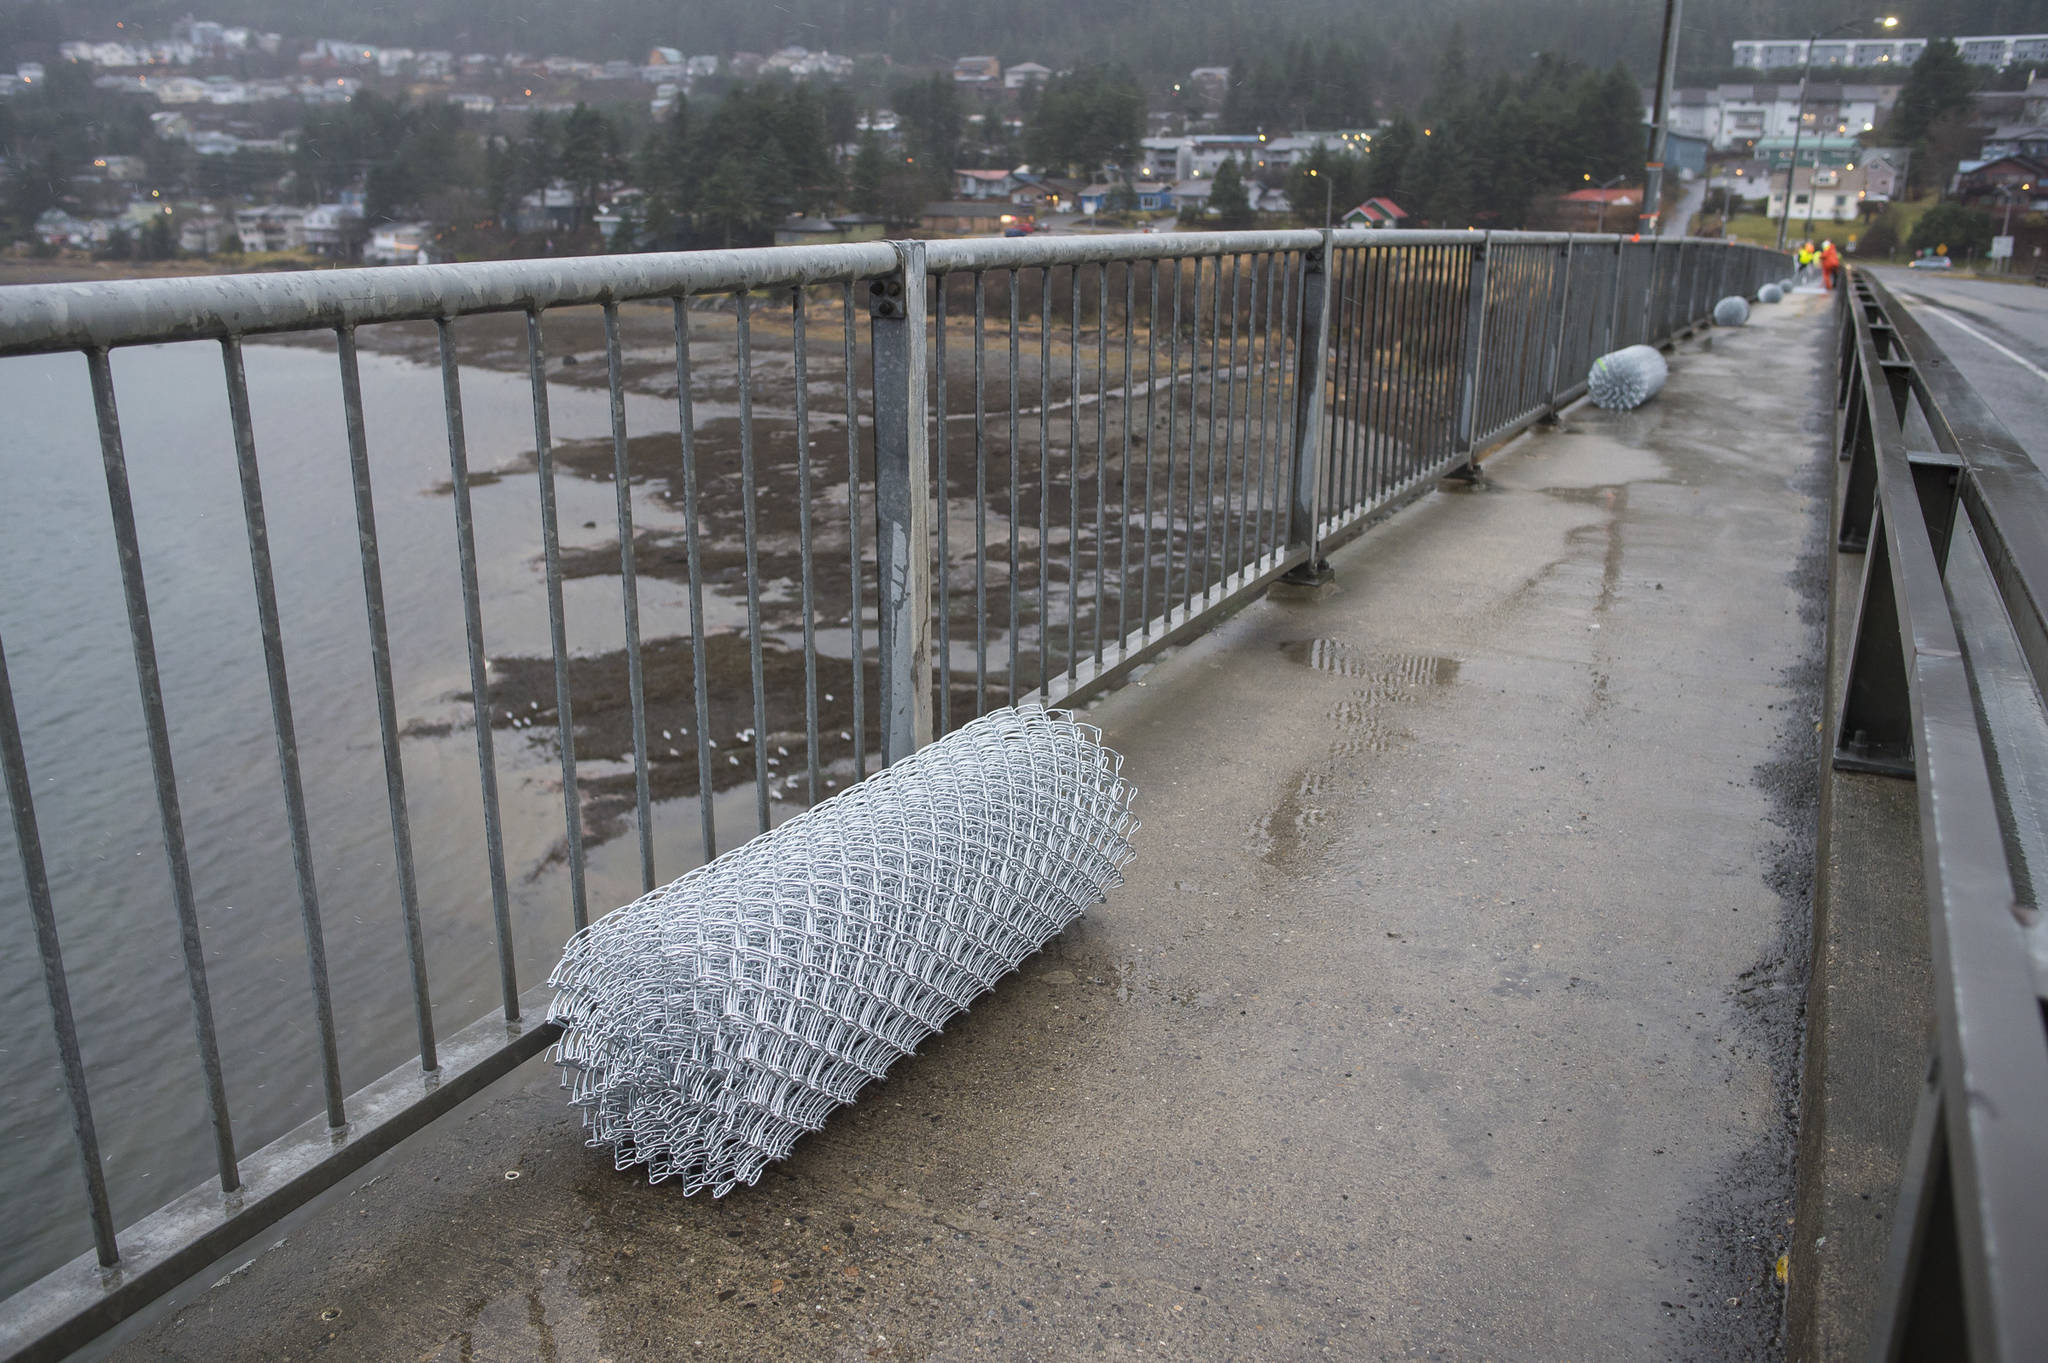 Rolls of chain-link fencing sit ready to be installed by the Department of Transportation and Public Facilities along the pedestrian walkway over the Douglas Bridge on Monday, Nov. 26, 2018. (Michael Penn | Juneau Empire)